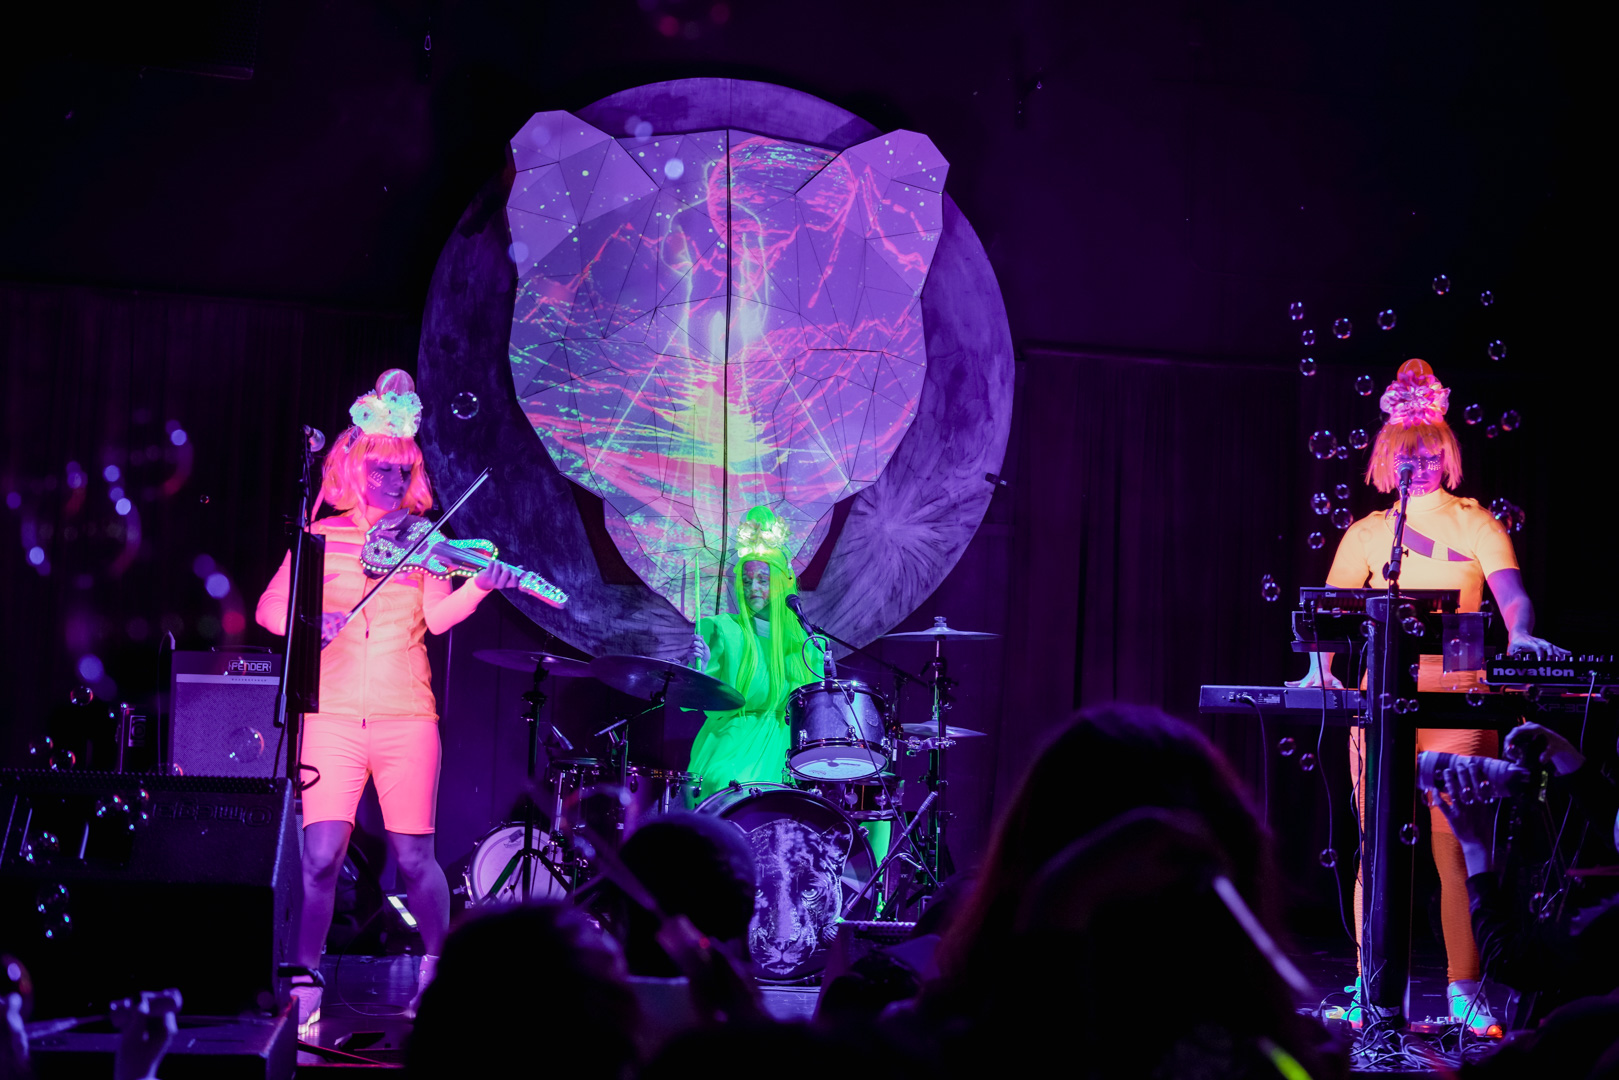 3 female musicians on stage in highlighter color outfit with an alien aesthetic play violin, keyboards and drums on stage